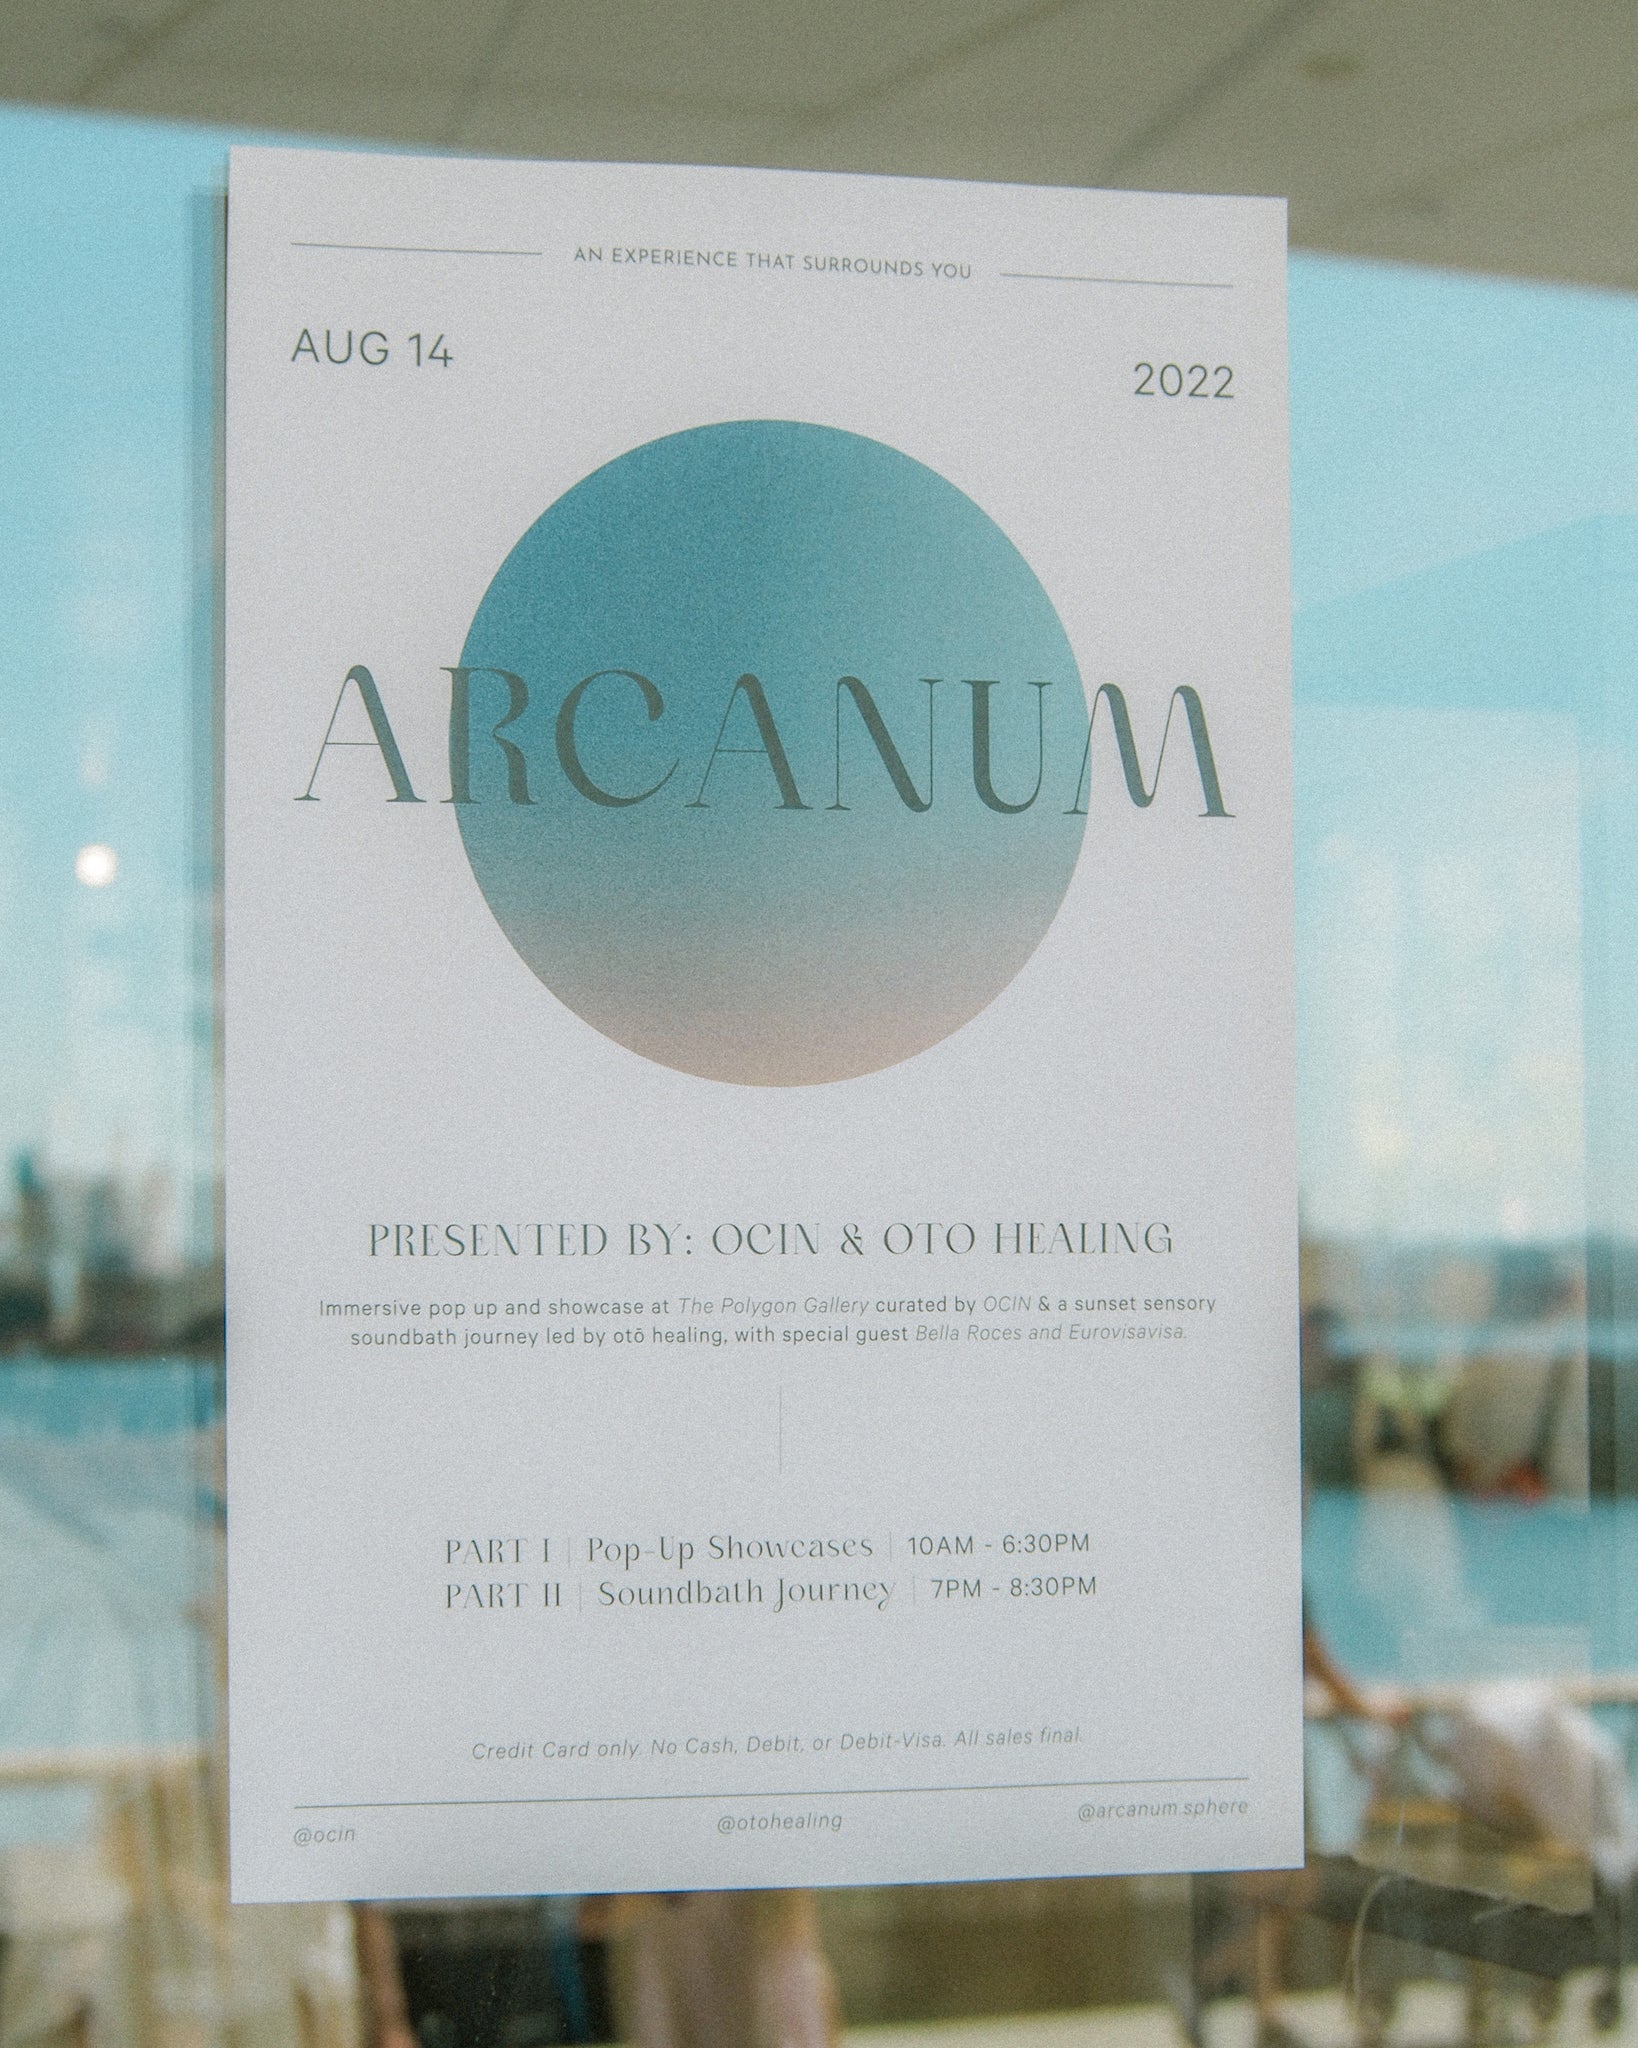 Arcanum showcase and pop-up experience